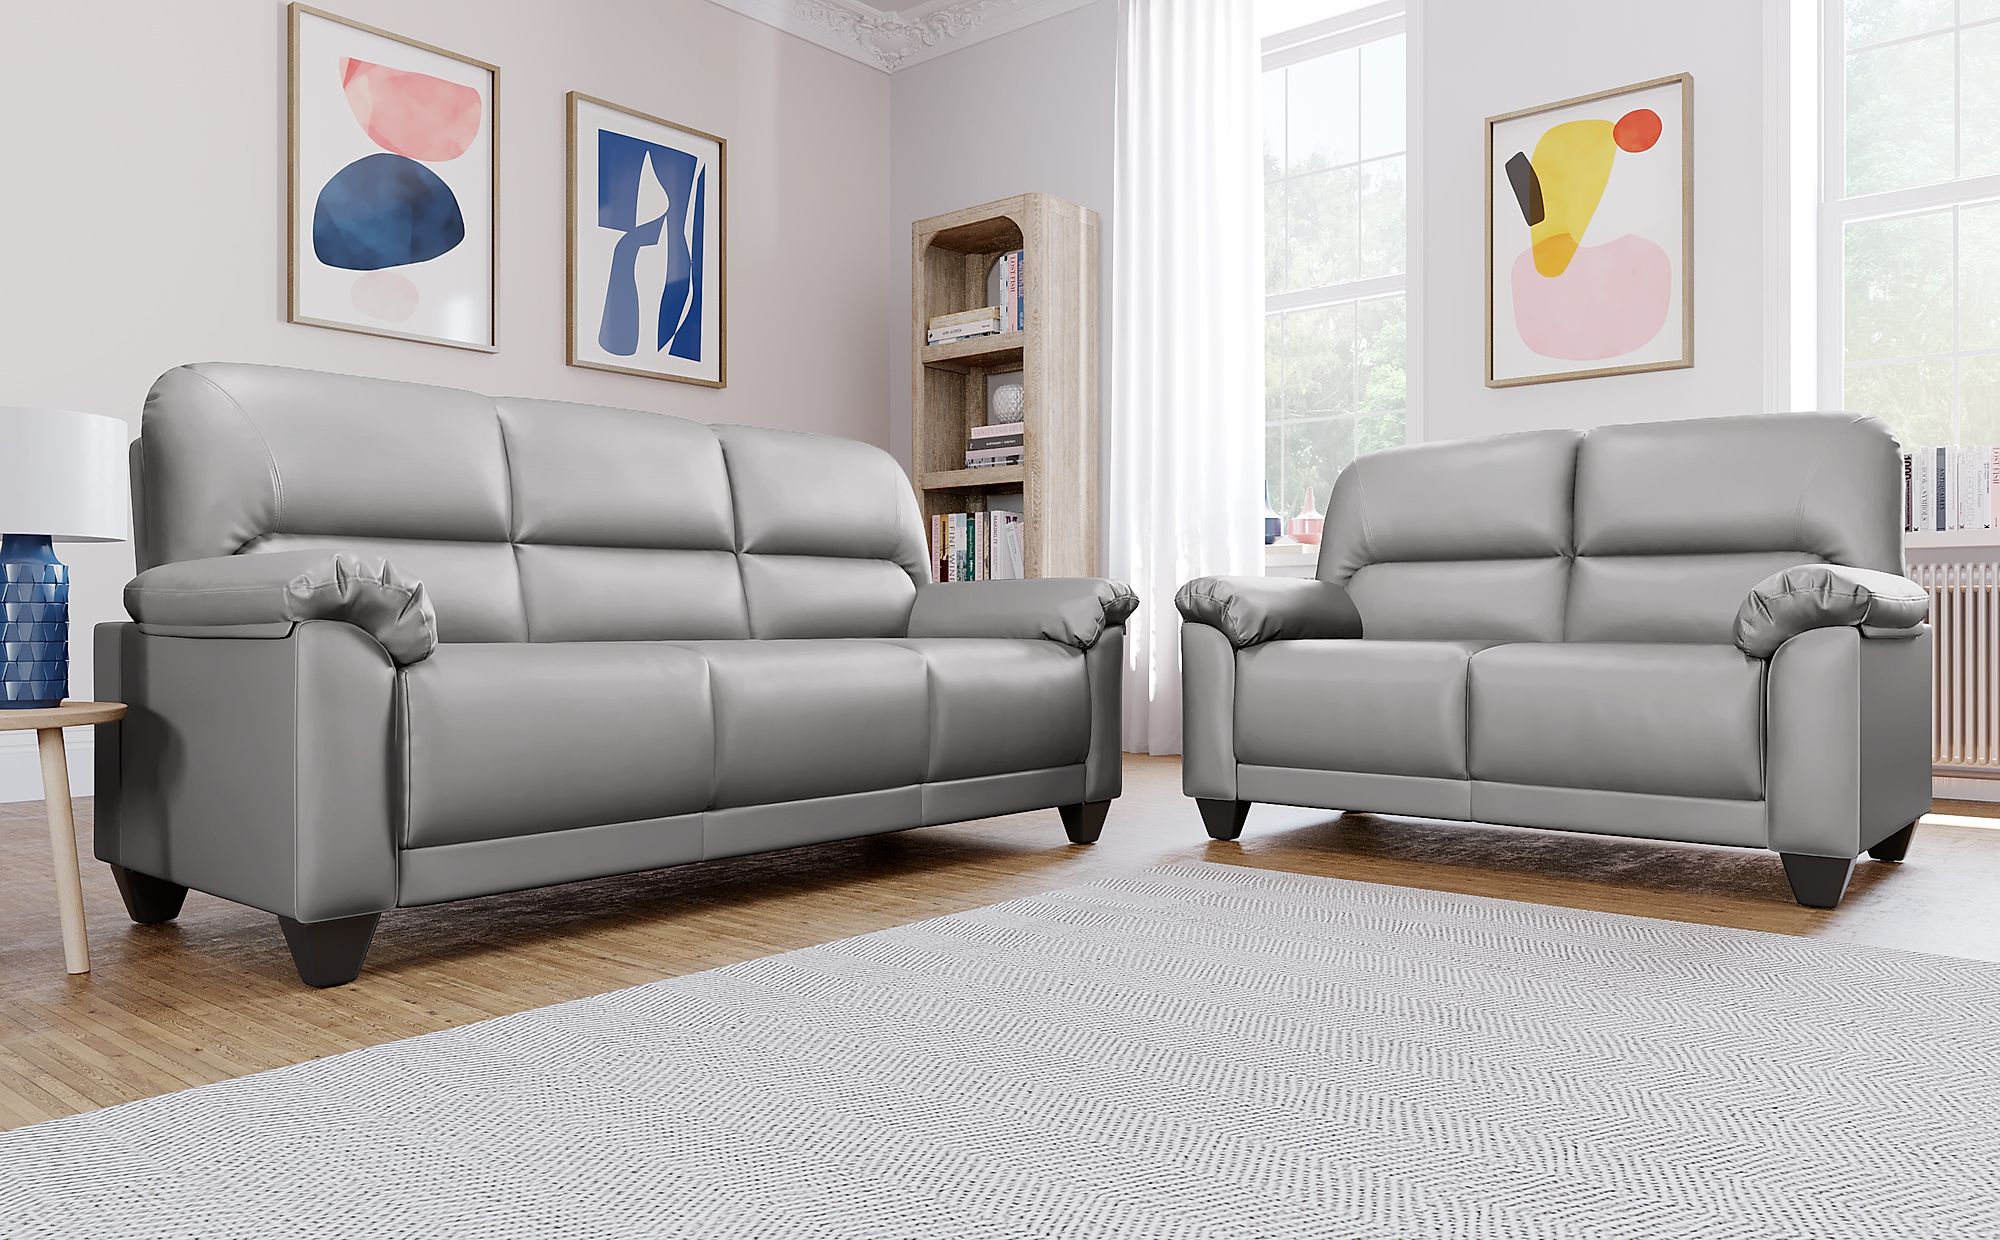 3 and 2 seater leather sofa packages